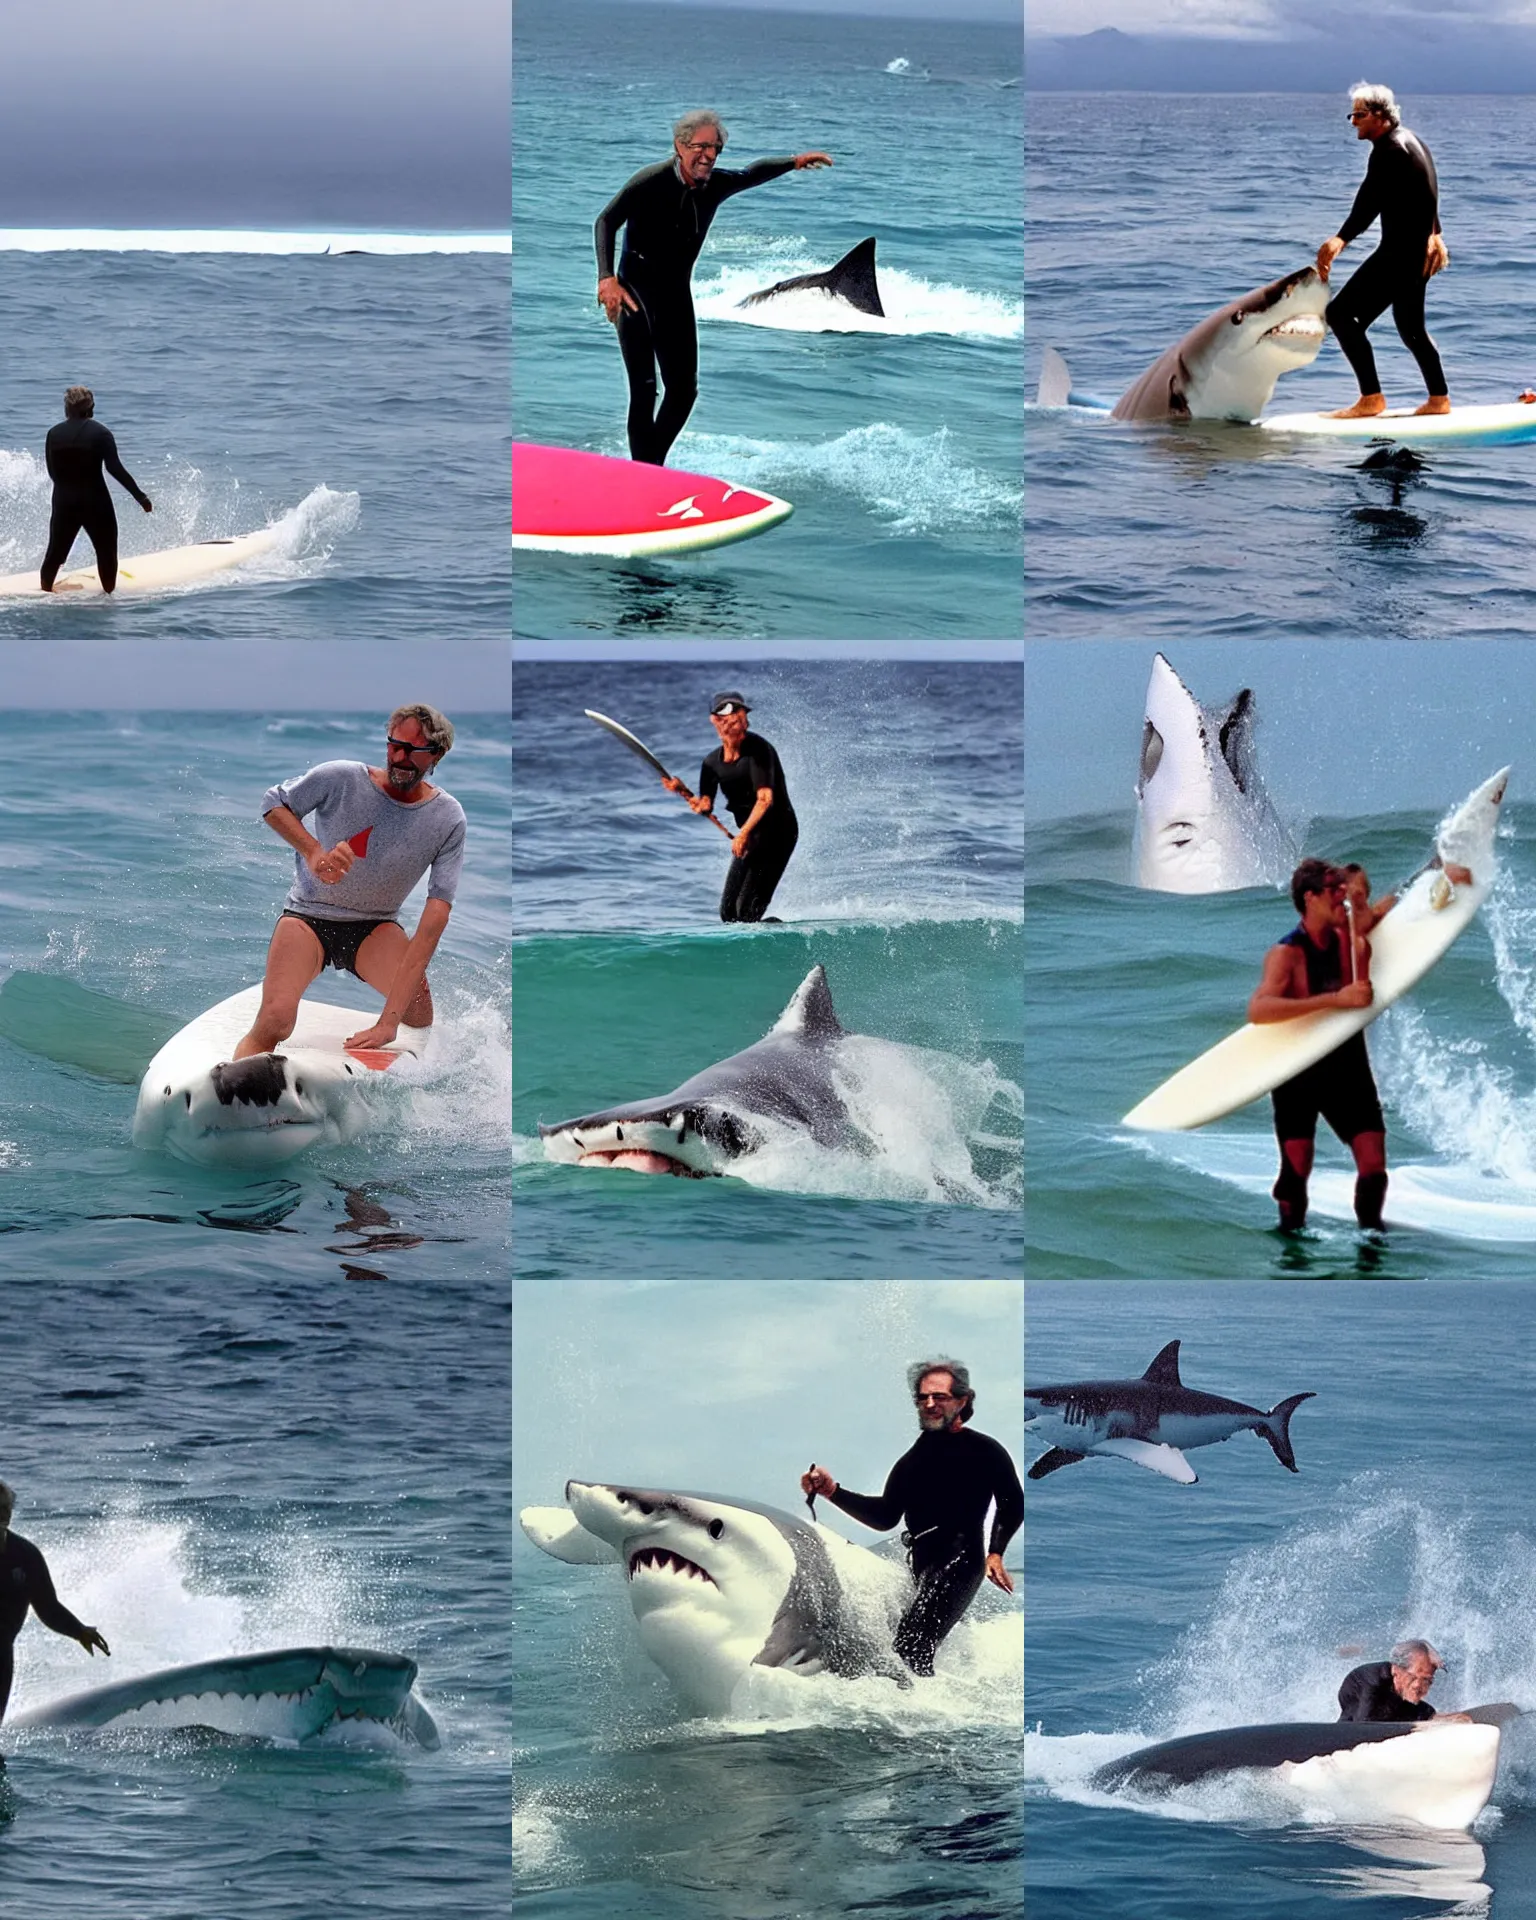 Prompt: Steven Spielberg paddling on a Surfboard while a huge shark fin of a great white shark appears behind him